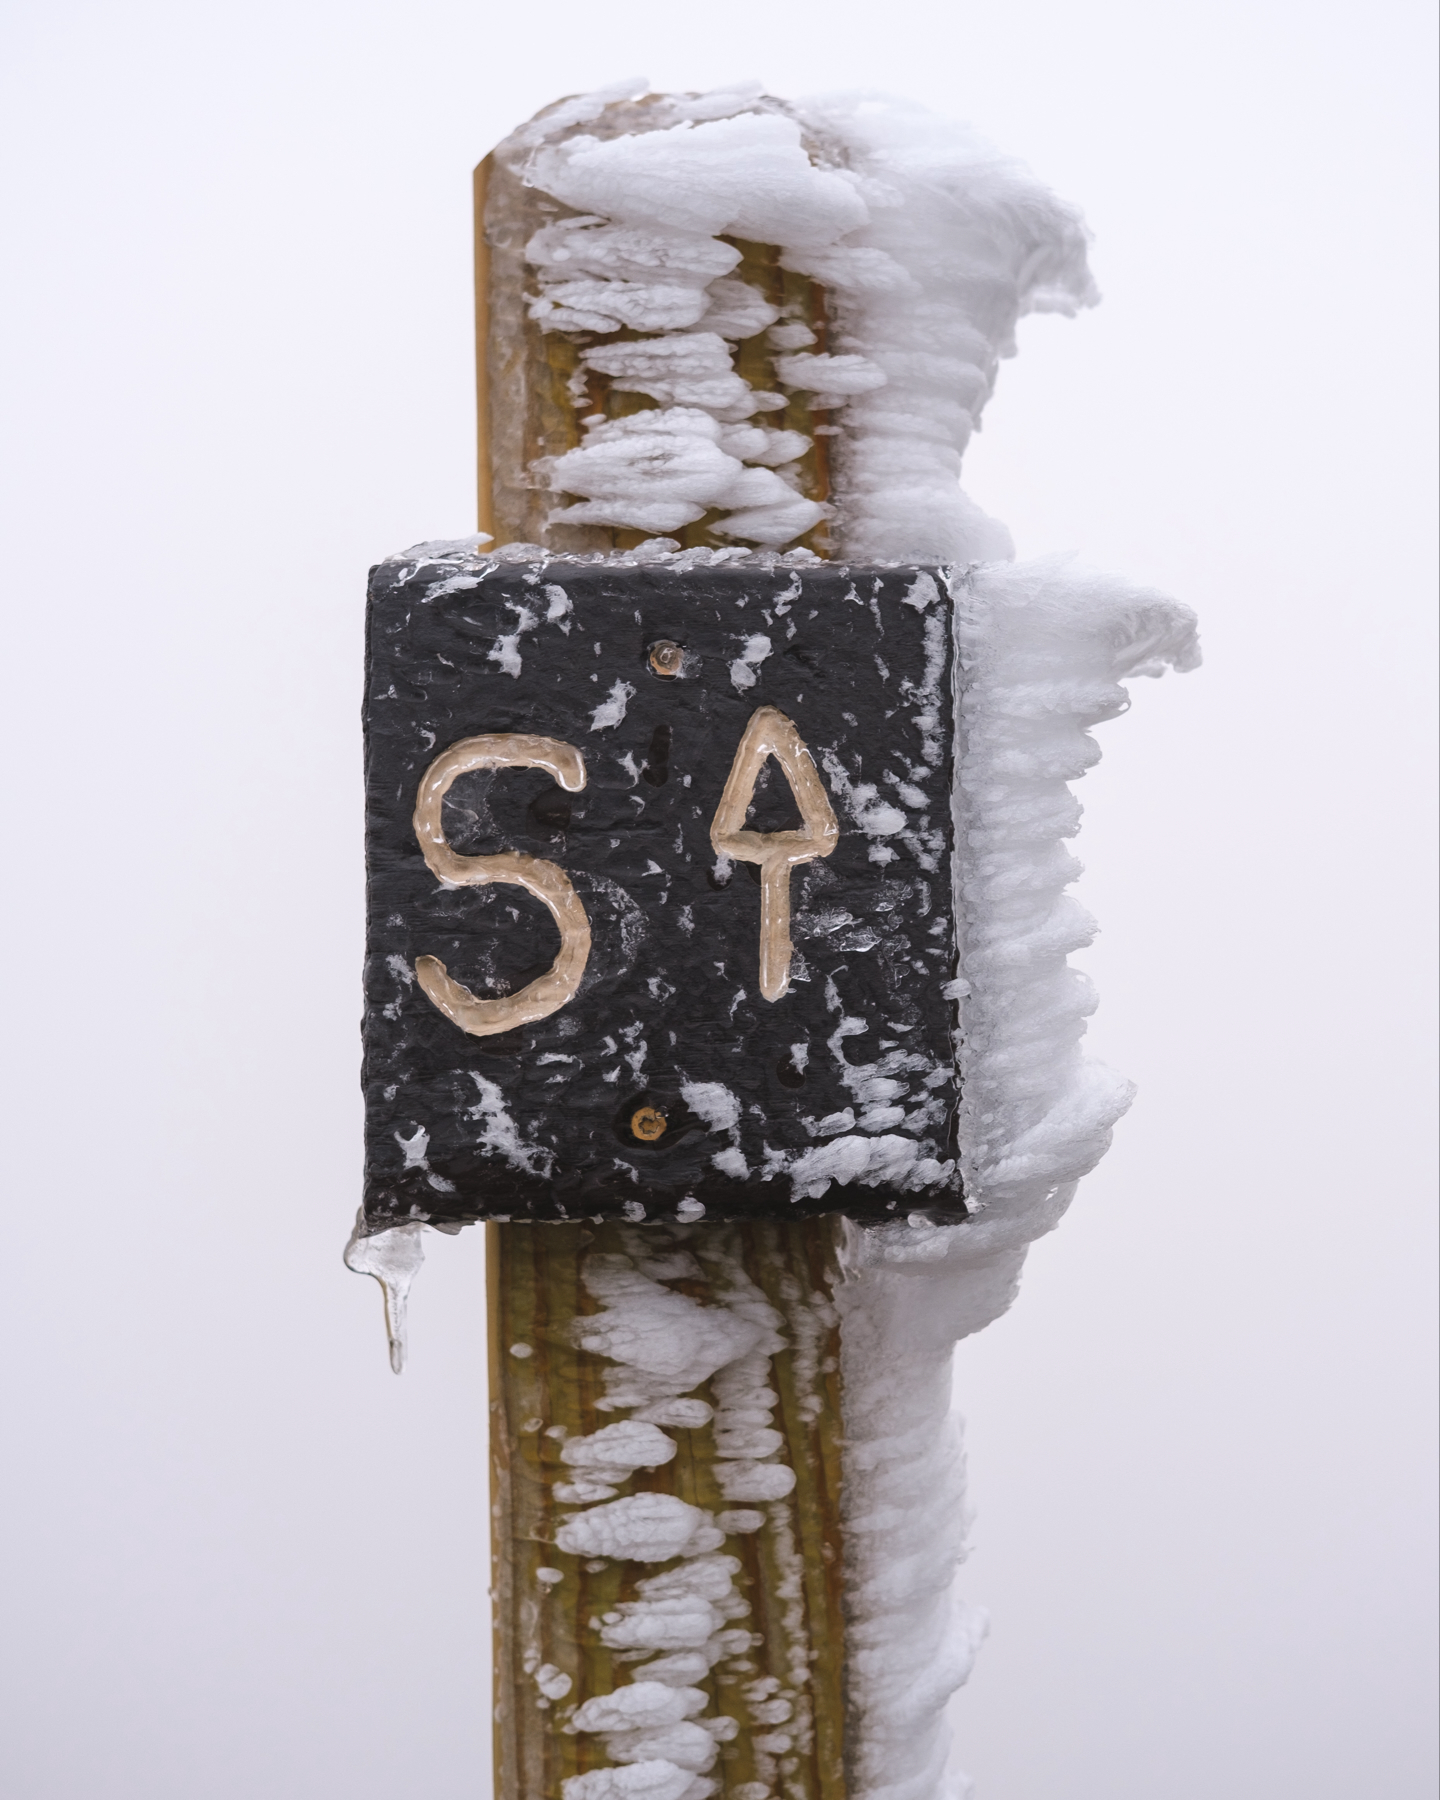 An ice-covered signpost with the letter “S” carved into it, icicles forming, and frost clinging to the wood in a cold, wintry environment.